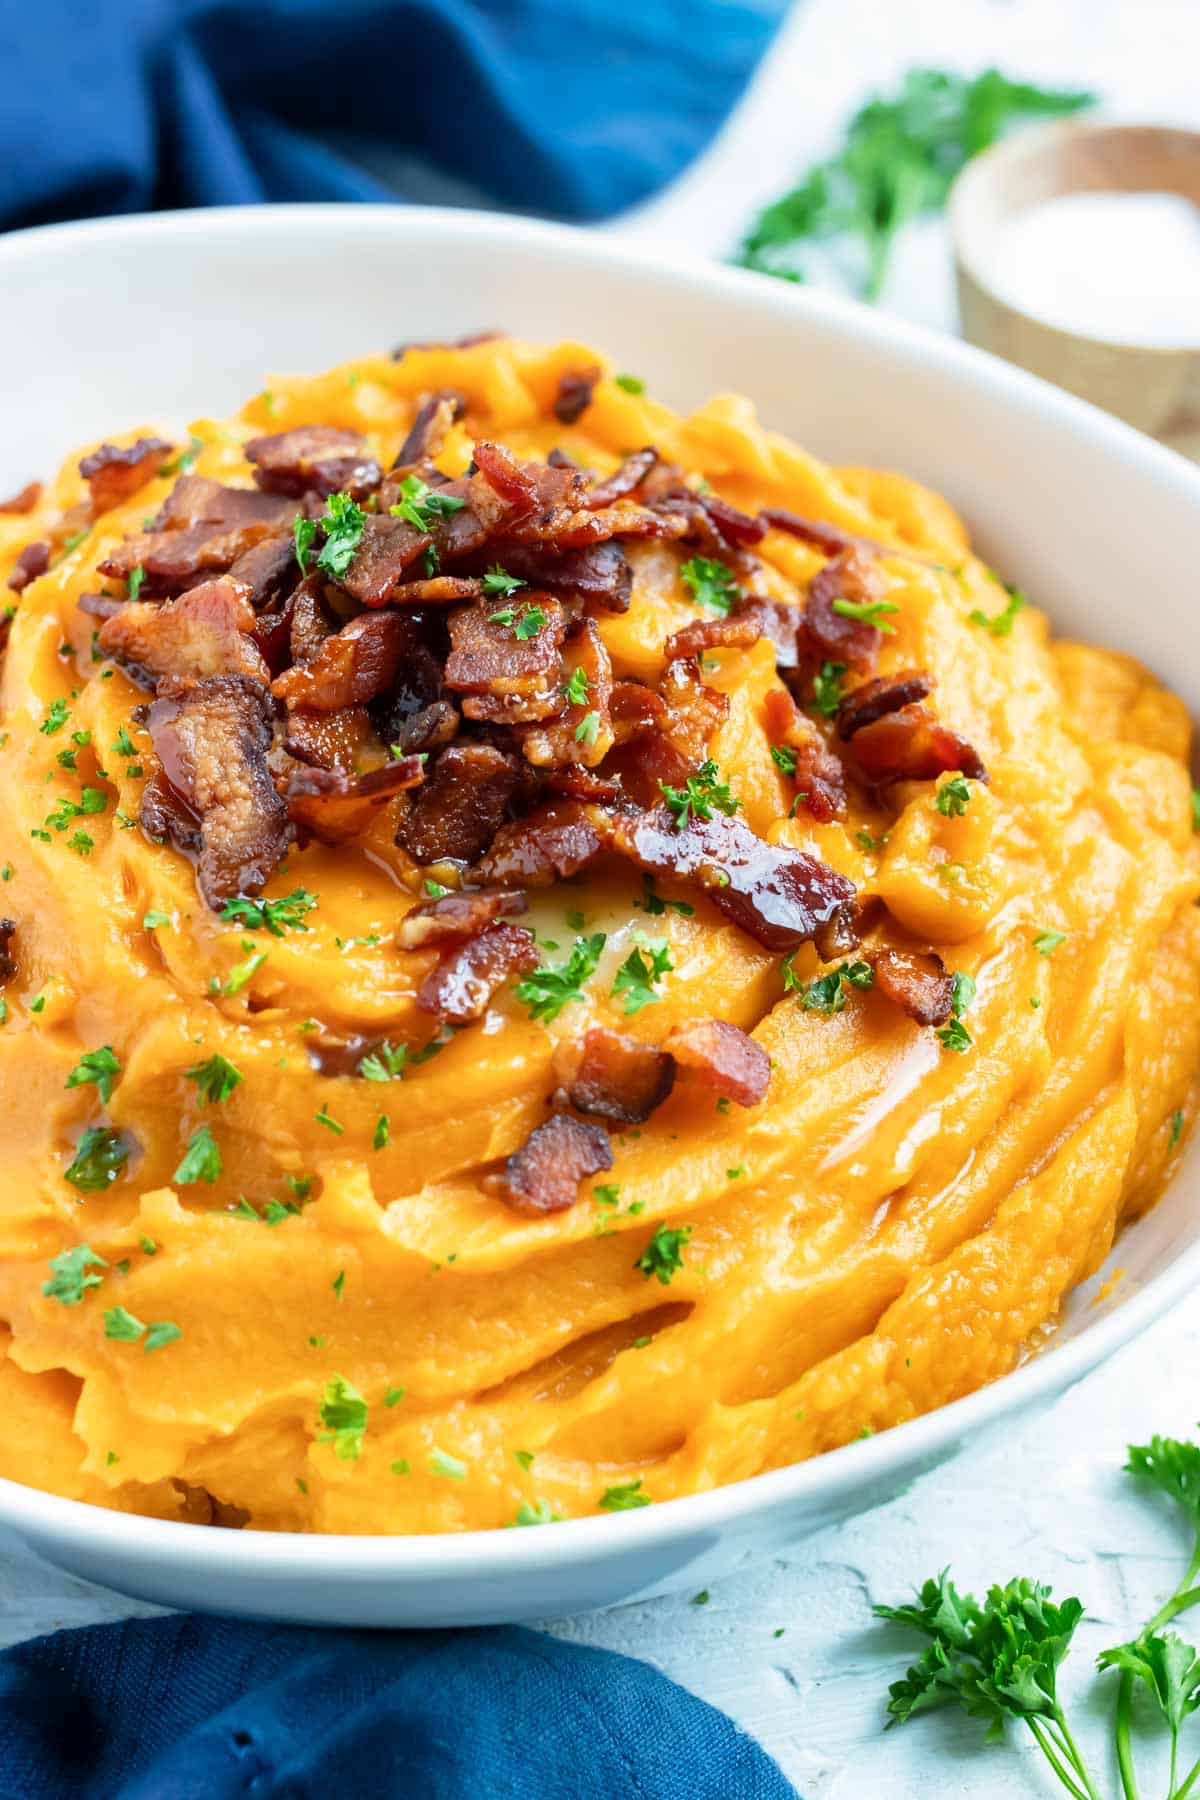 A bowl full of mashed sweet potatoes.